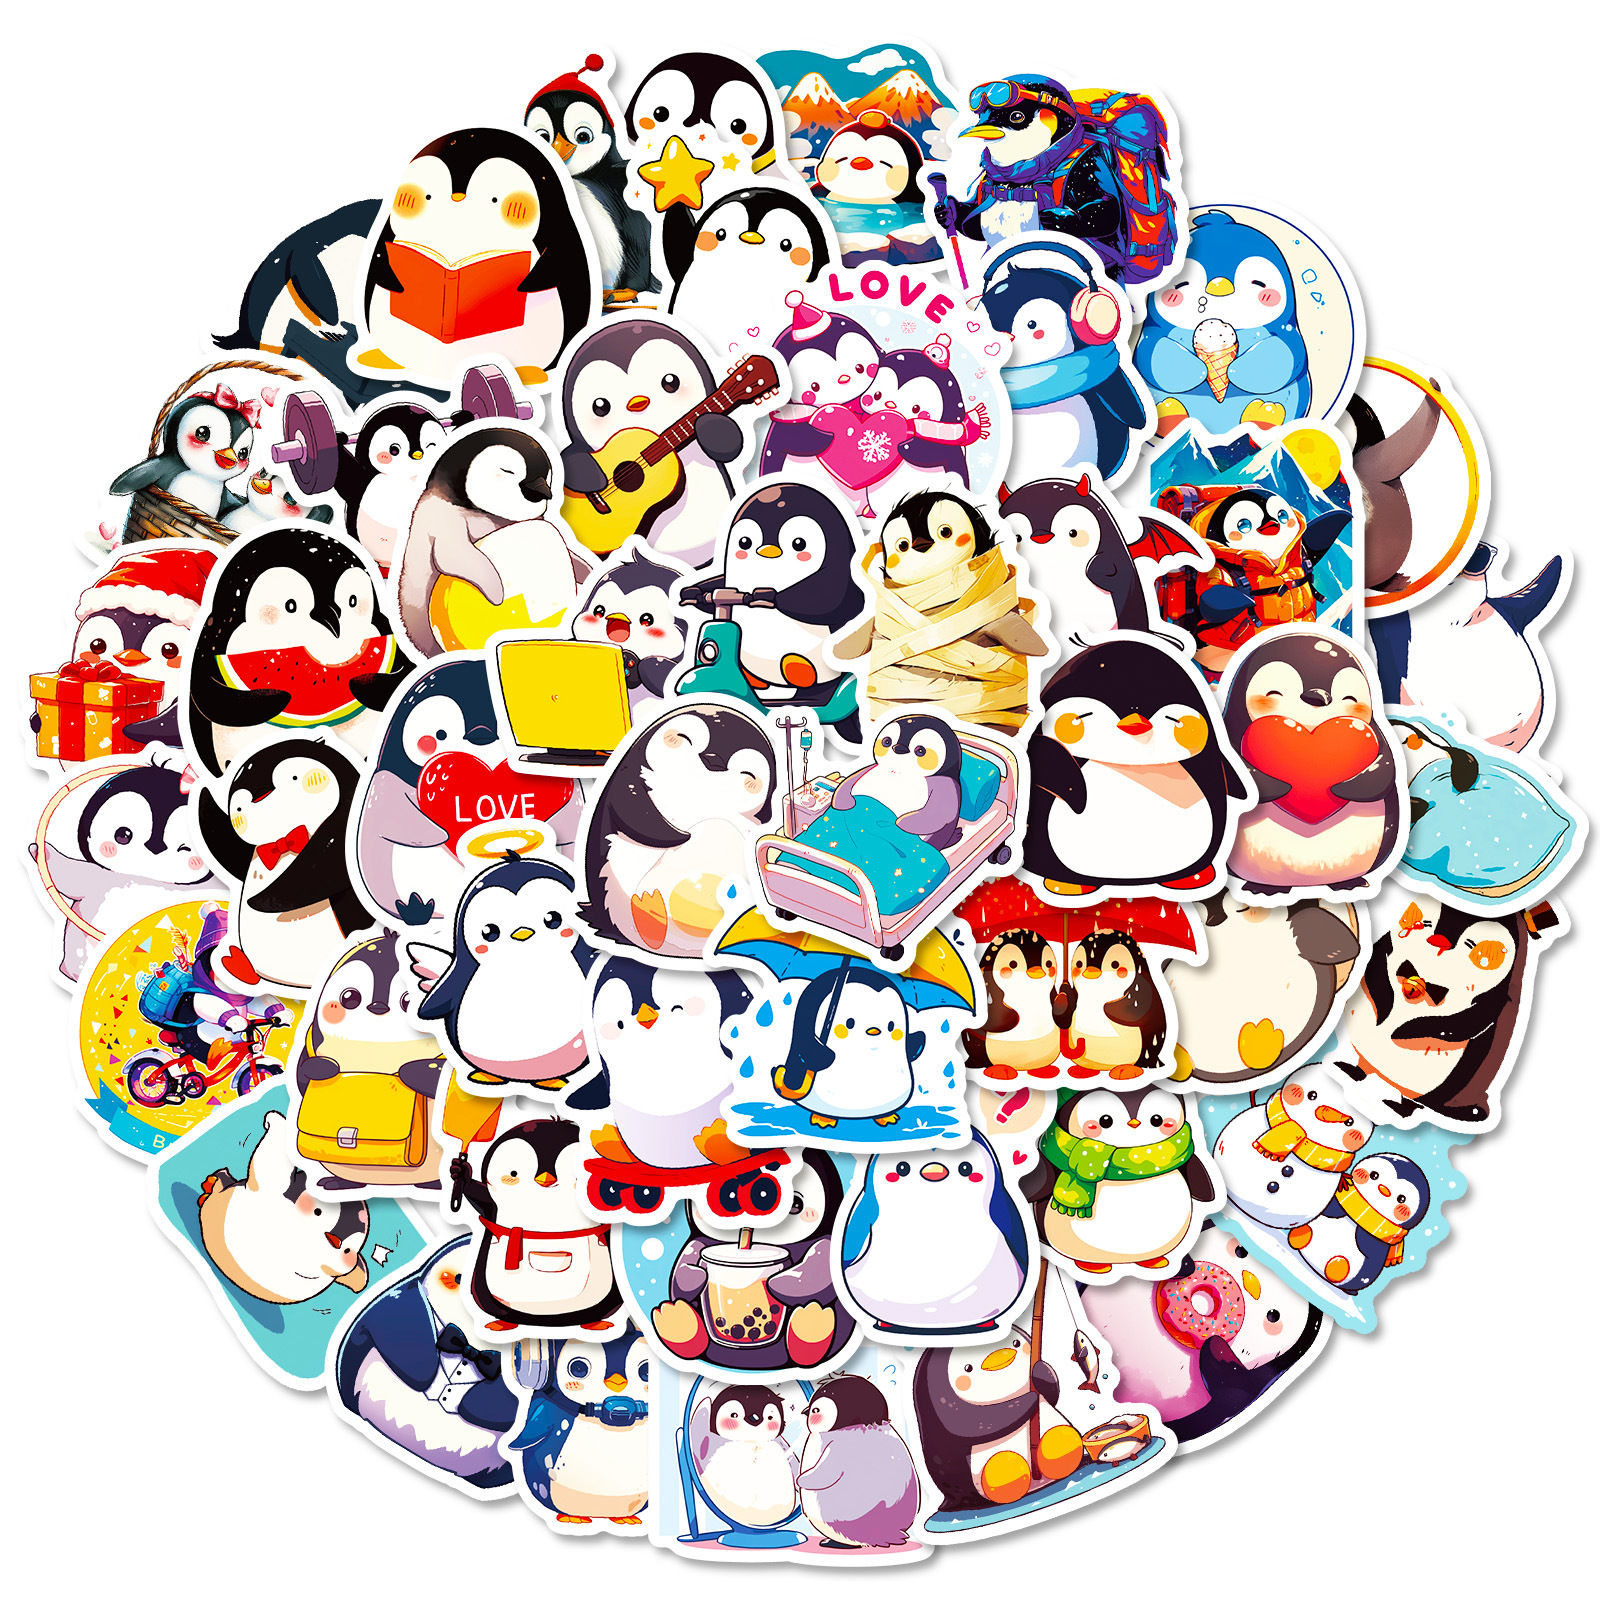 50 cute and funny penguin cartoon doodle animal stickers